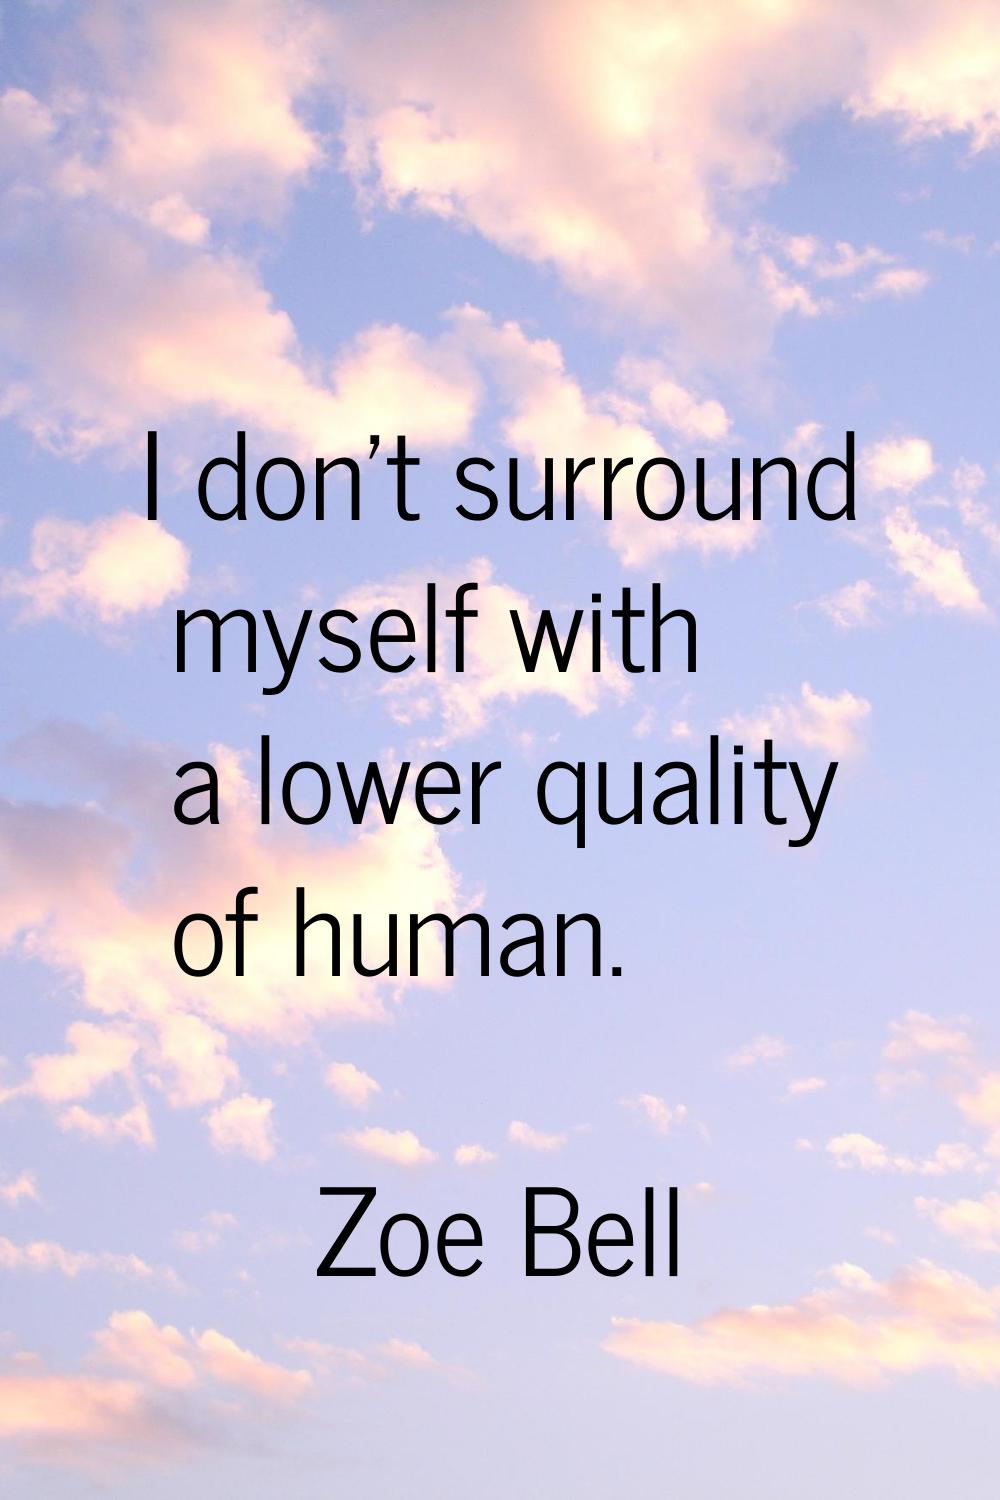 I don't surround myself with a lower quality of human.